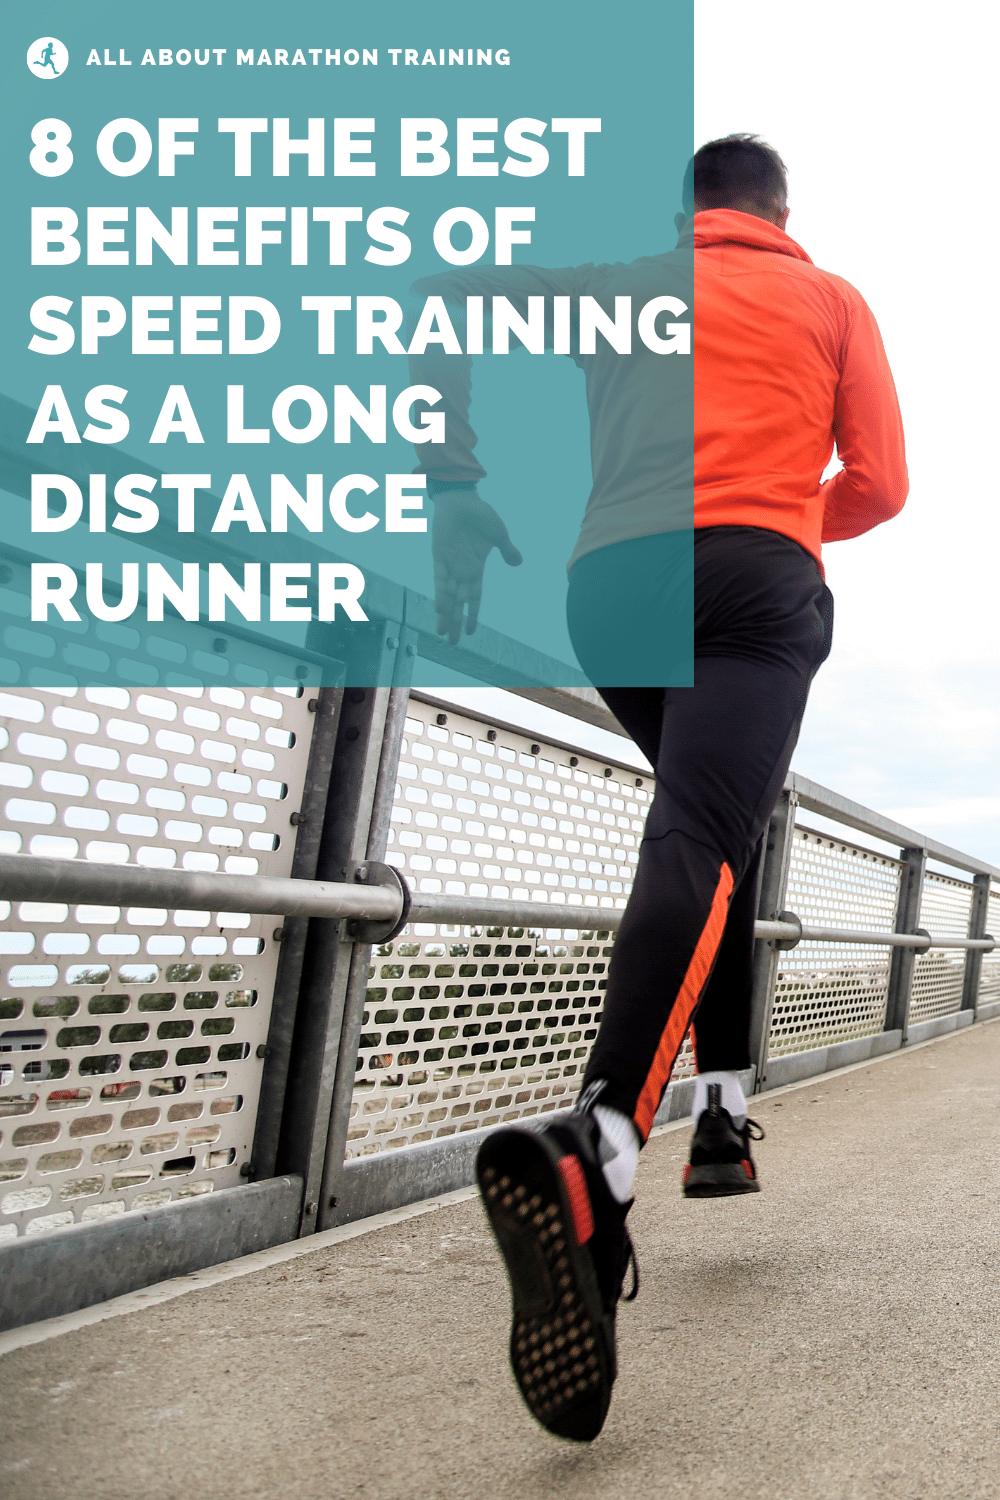 Why Leg Speed Matters for Distance Runners